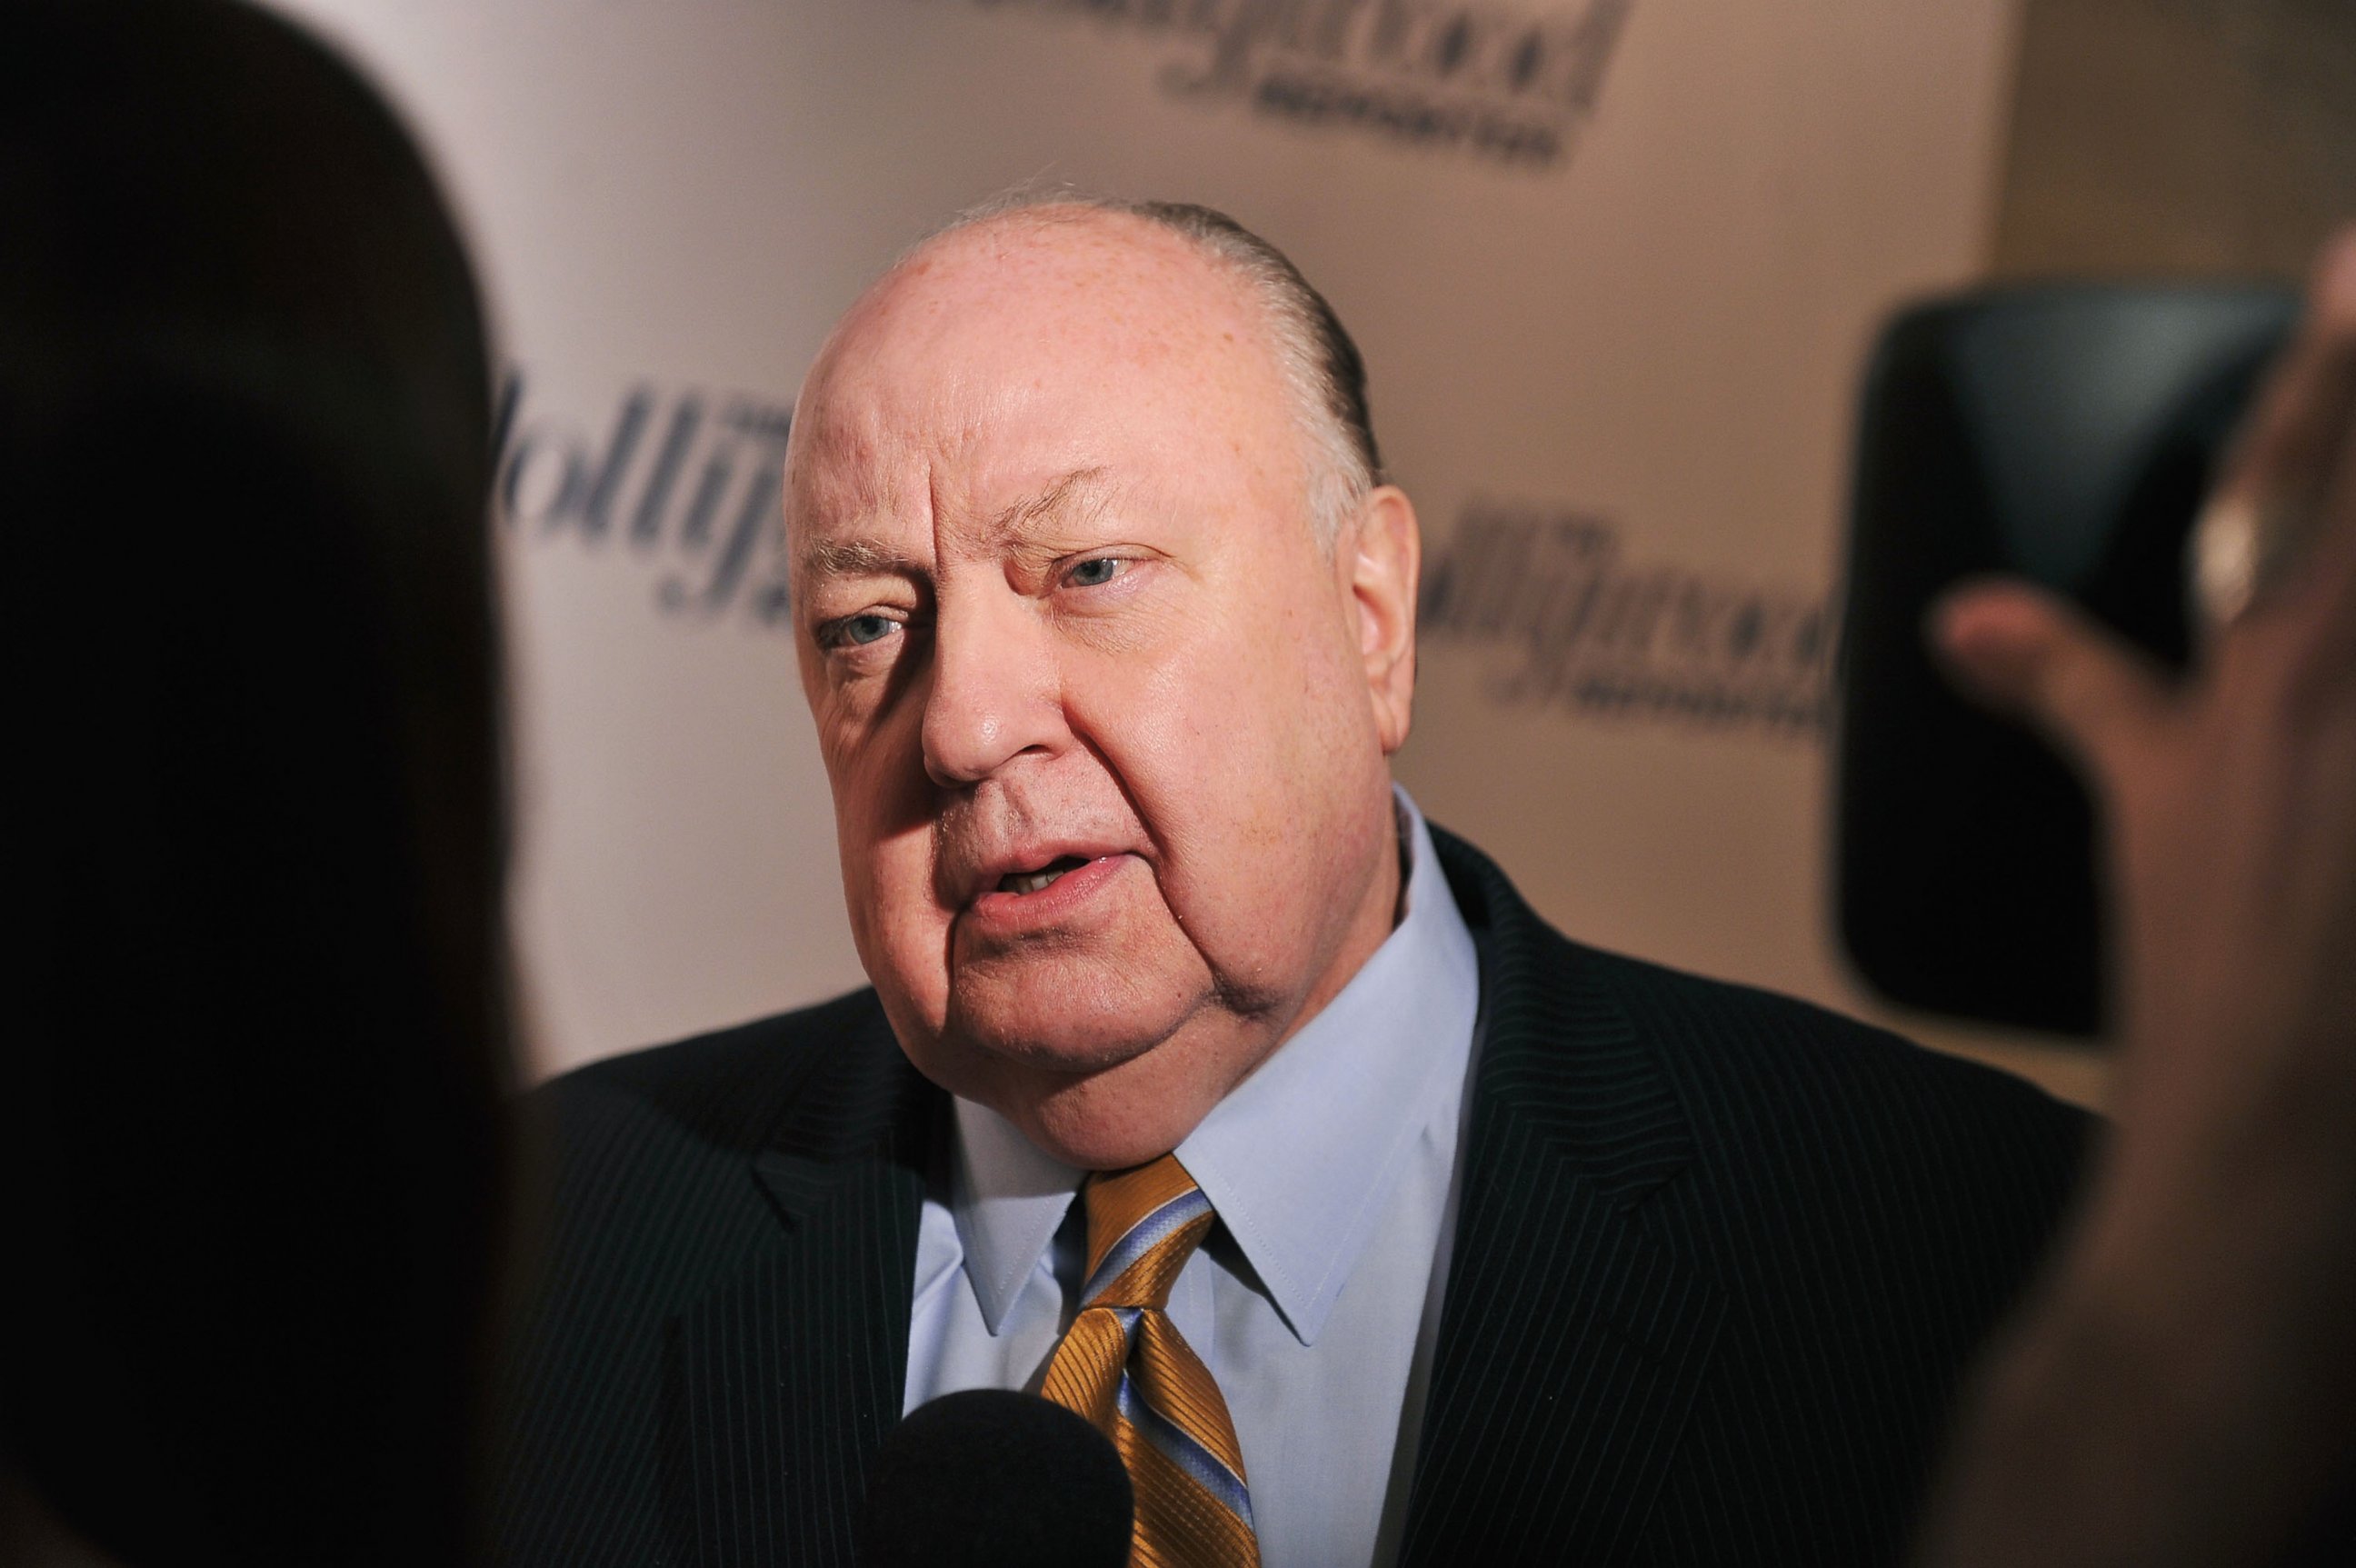 PHOTO: Roger Ailes attends an event at the Four Season Grill Room on April 11, 2012 in New York City.